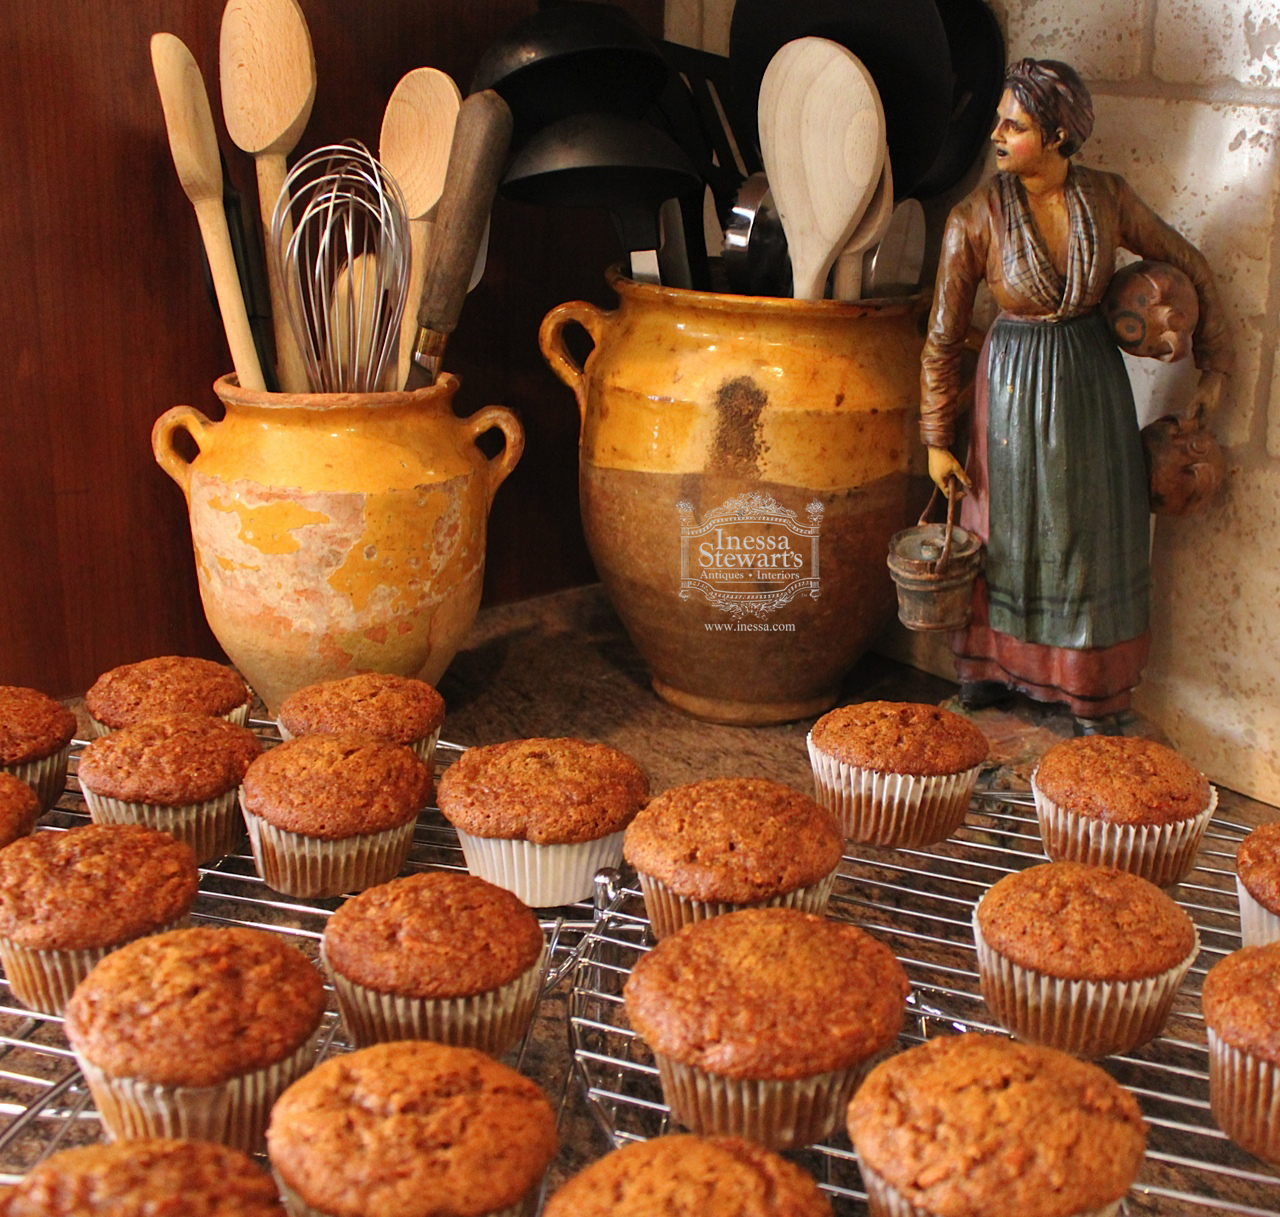 Inessa Stewart's Antiques carrot cupcakes without frosting